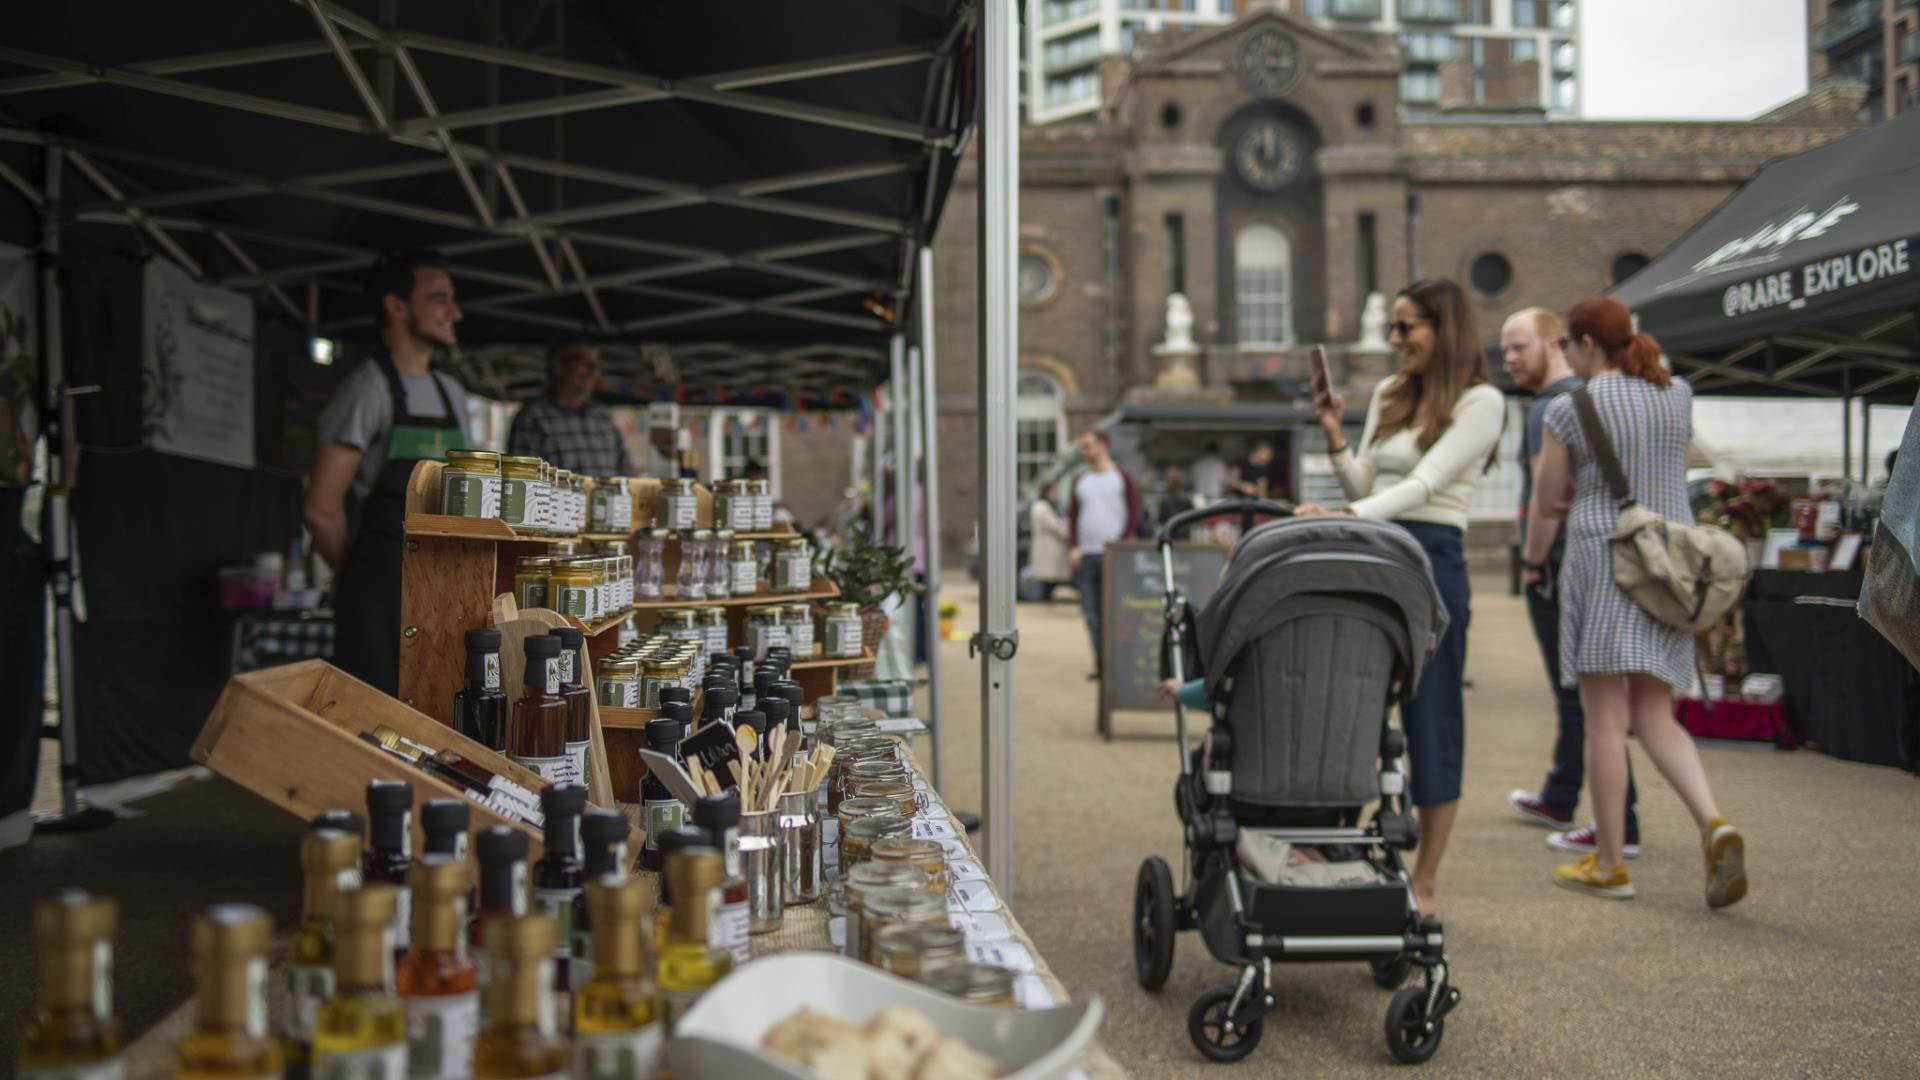 People stop to look at the stalls at Royal Arsenal Farmers' Market in Woolwich, Greenwich.